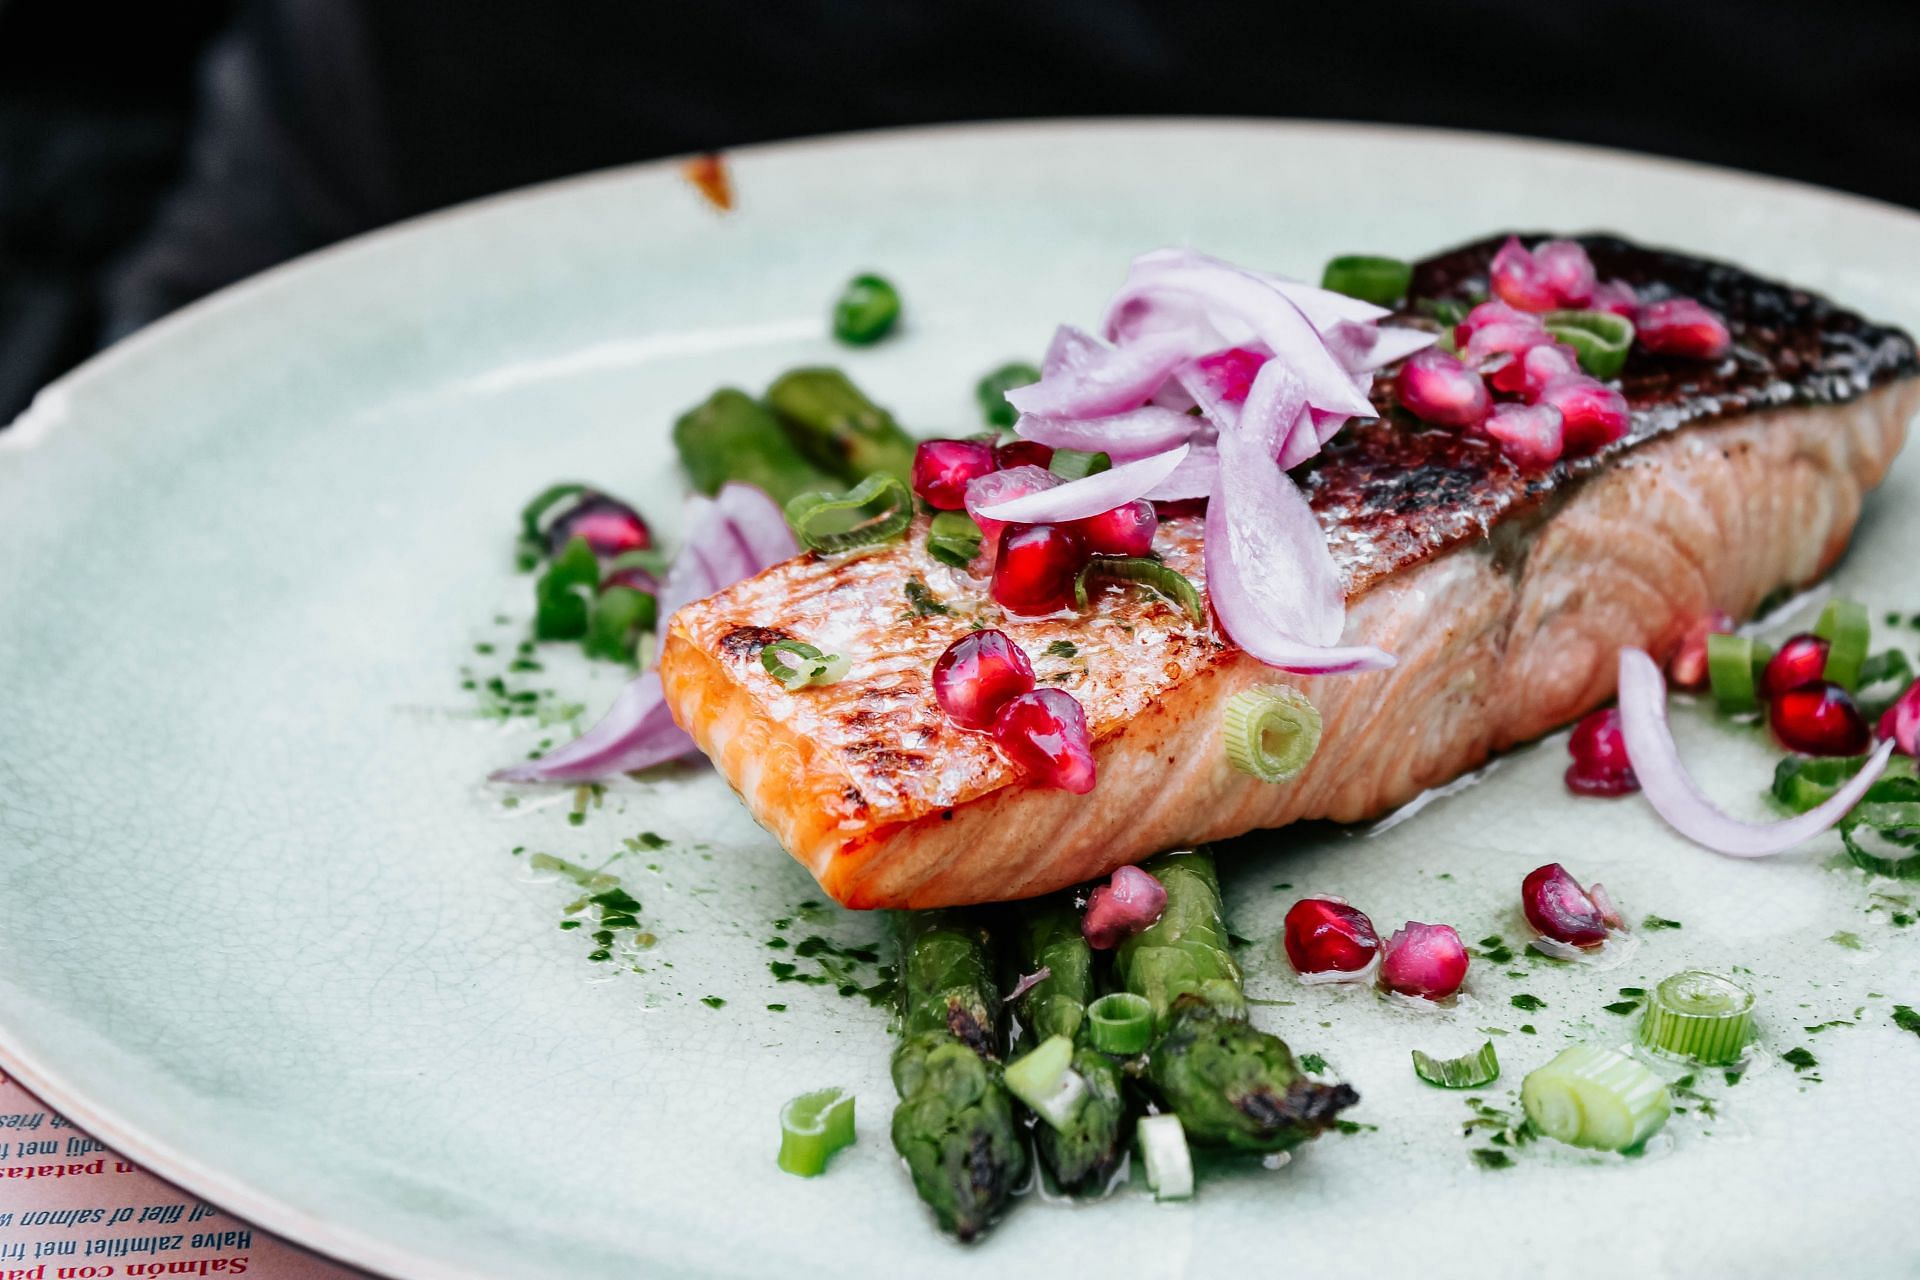 Salmon is a superfood rich in B12 and Omega-3 fatty acids (Image via Unsplash)